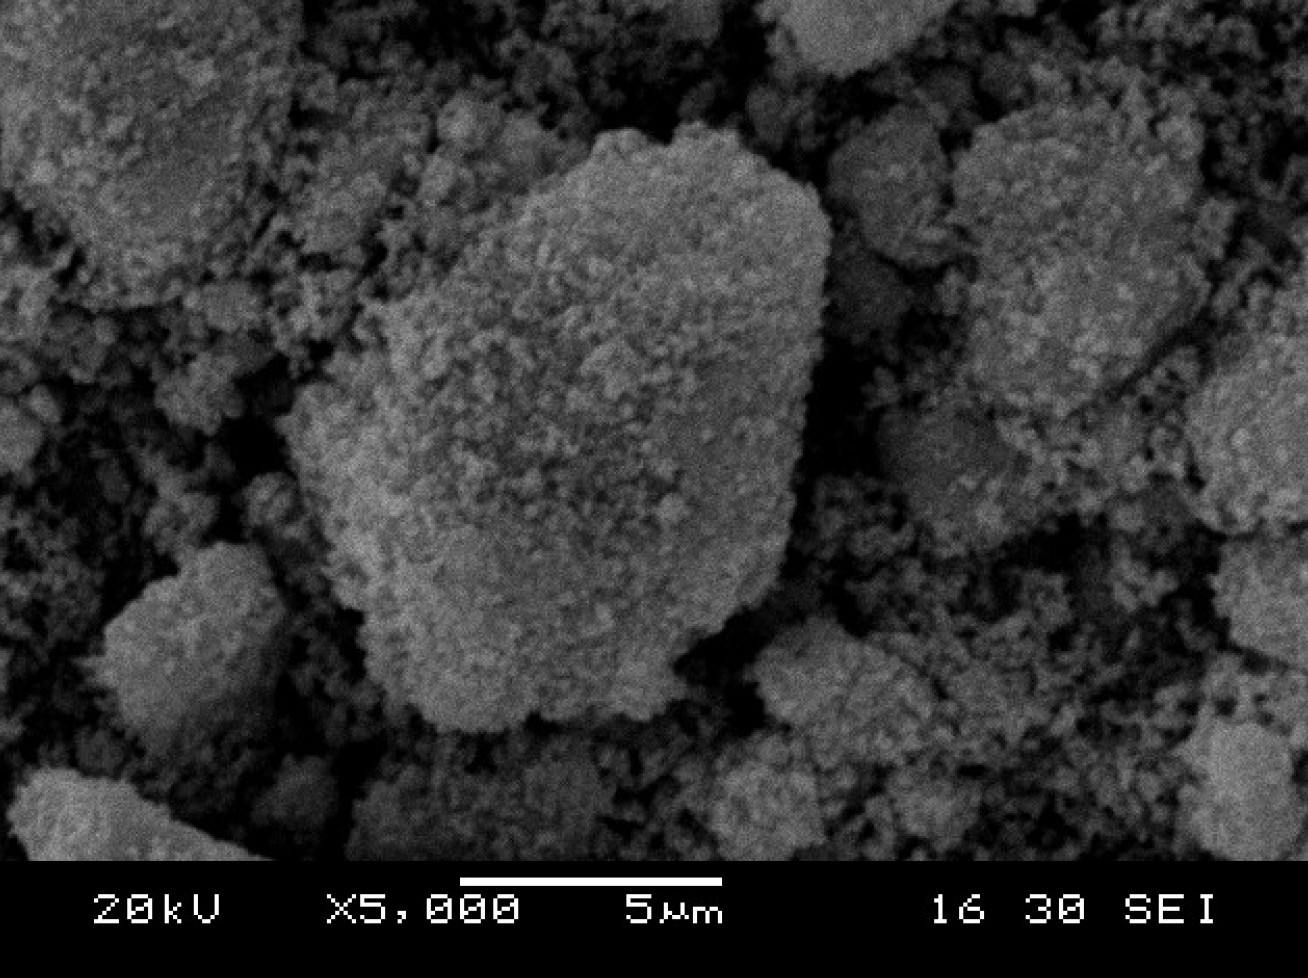 Scanning Electron Microscope (SEM) image of the arsenic-removing material.